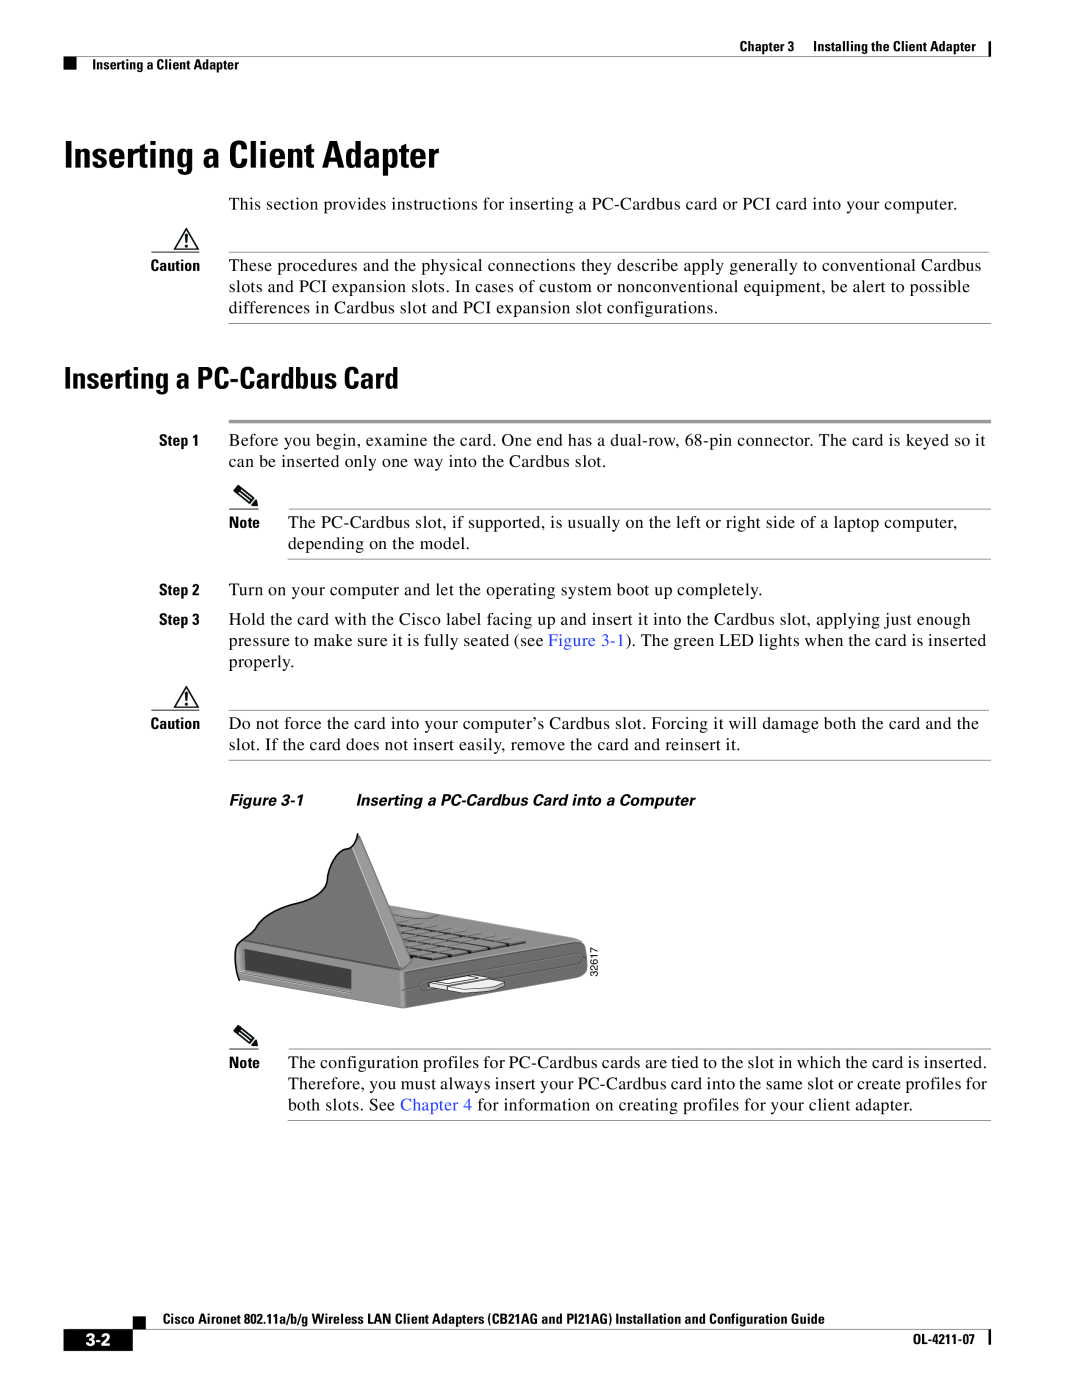 Cisco Systems PI21AG, CB21AG manual Inserting a Client Adapter, Inserting a PC-Cardbus Card 